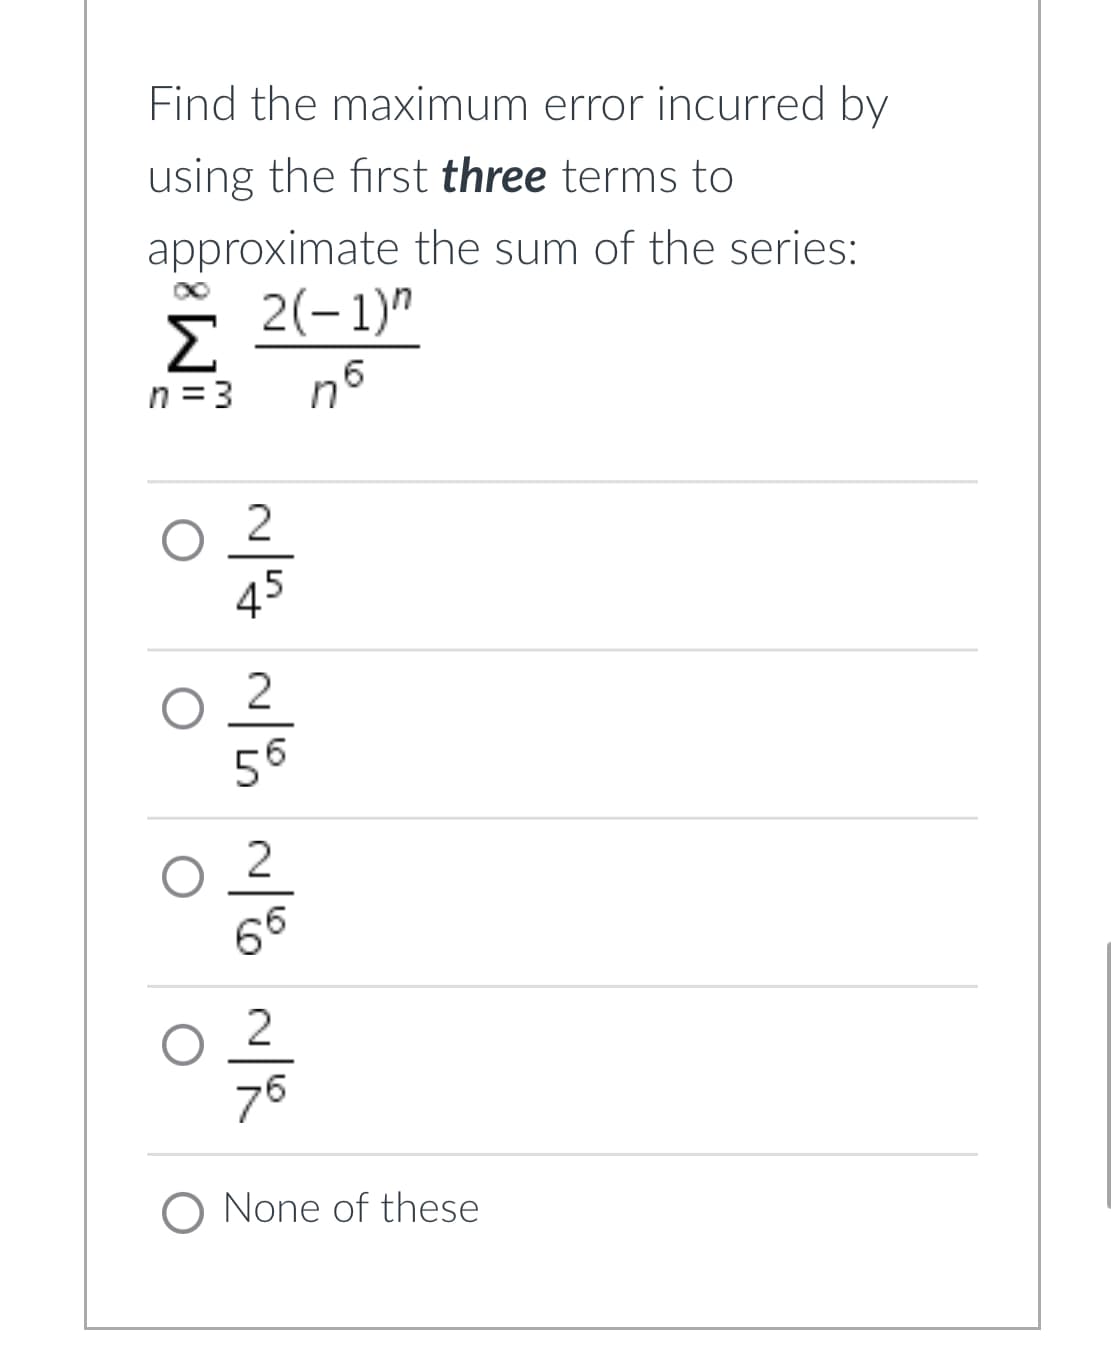 Find the maximum error incurred by
using the first three terms to
approximate the sum of the series:
Σ 2(-1)"
n = 3
nб
2
45
2
56
2
66
2
O
76
O None of these